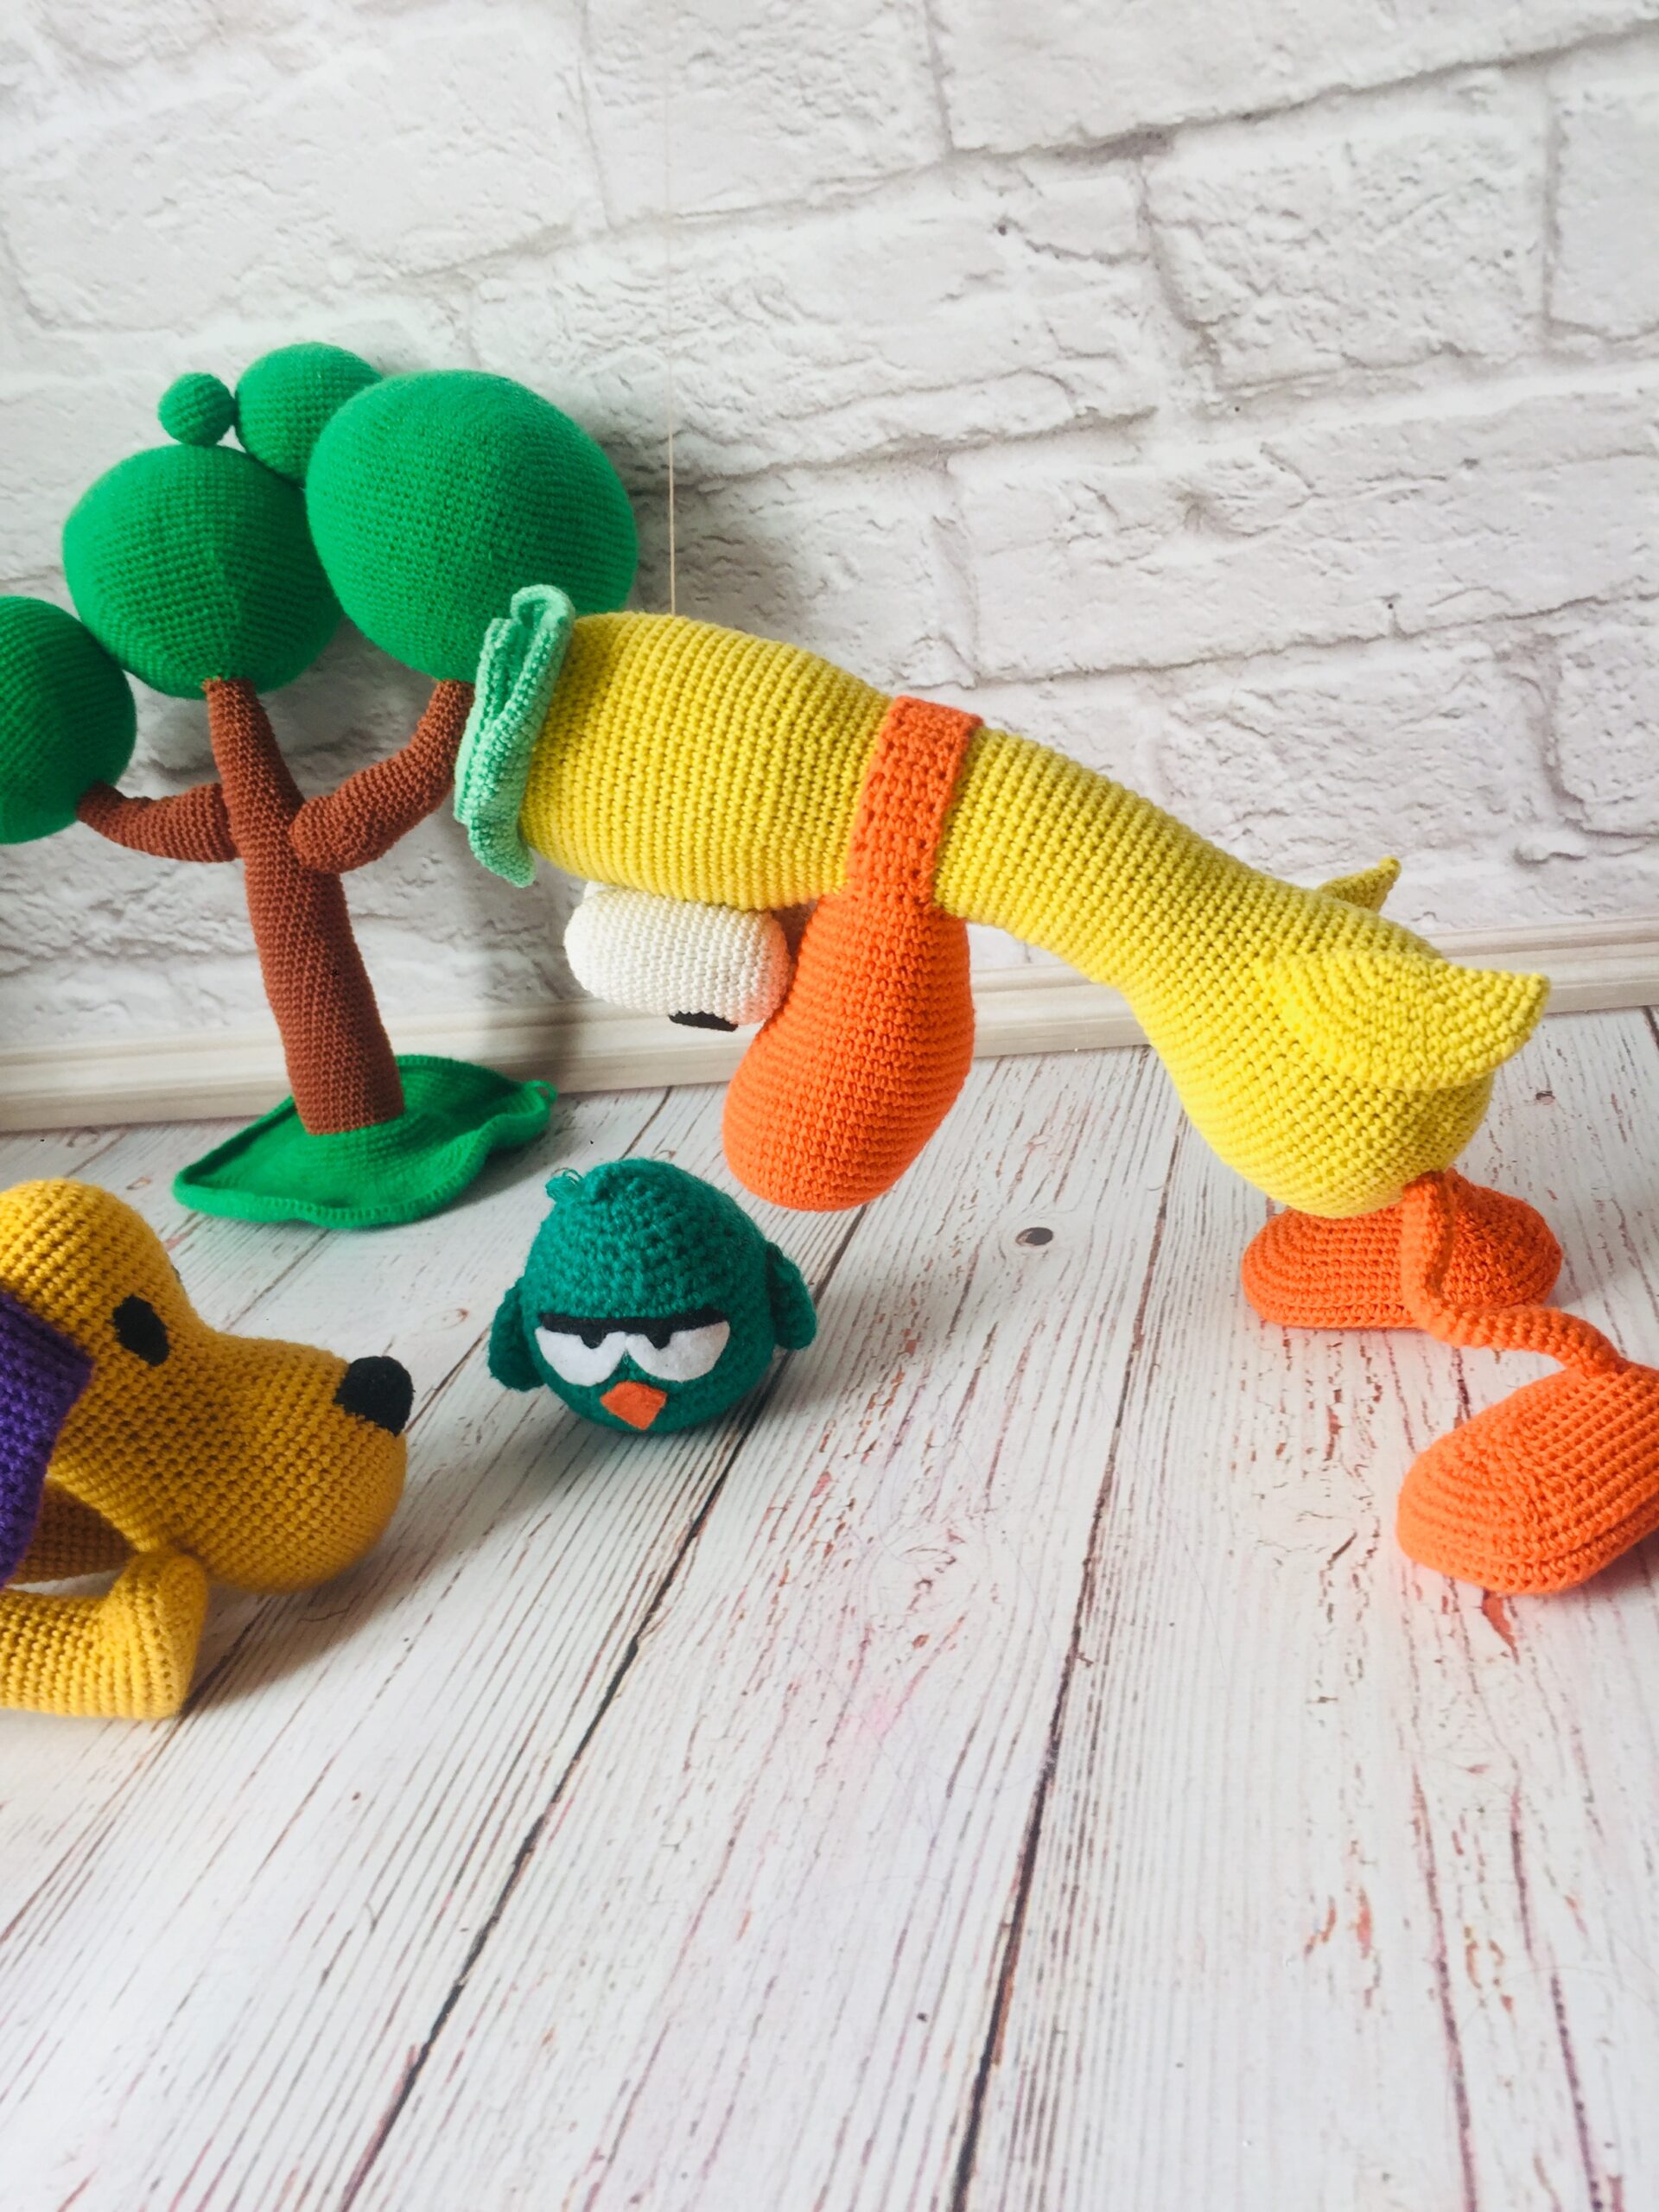 Pato duck Pocoyo plush toy Pato is a yellow duck Pocoyo soft toy